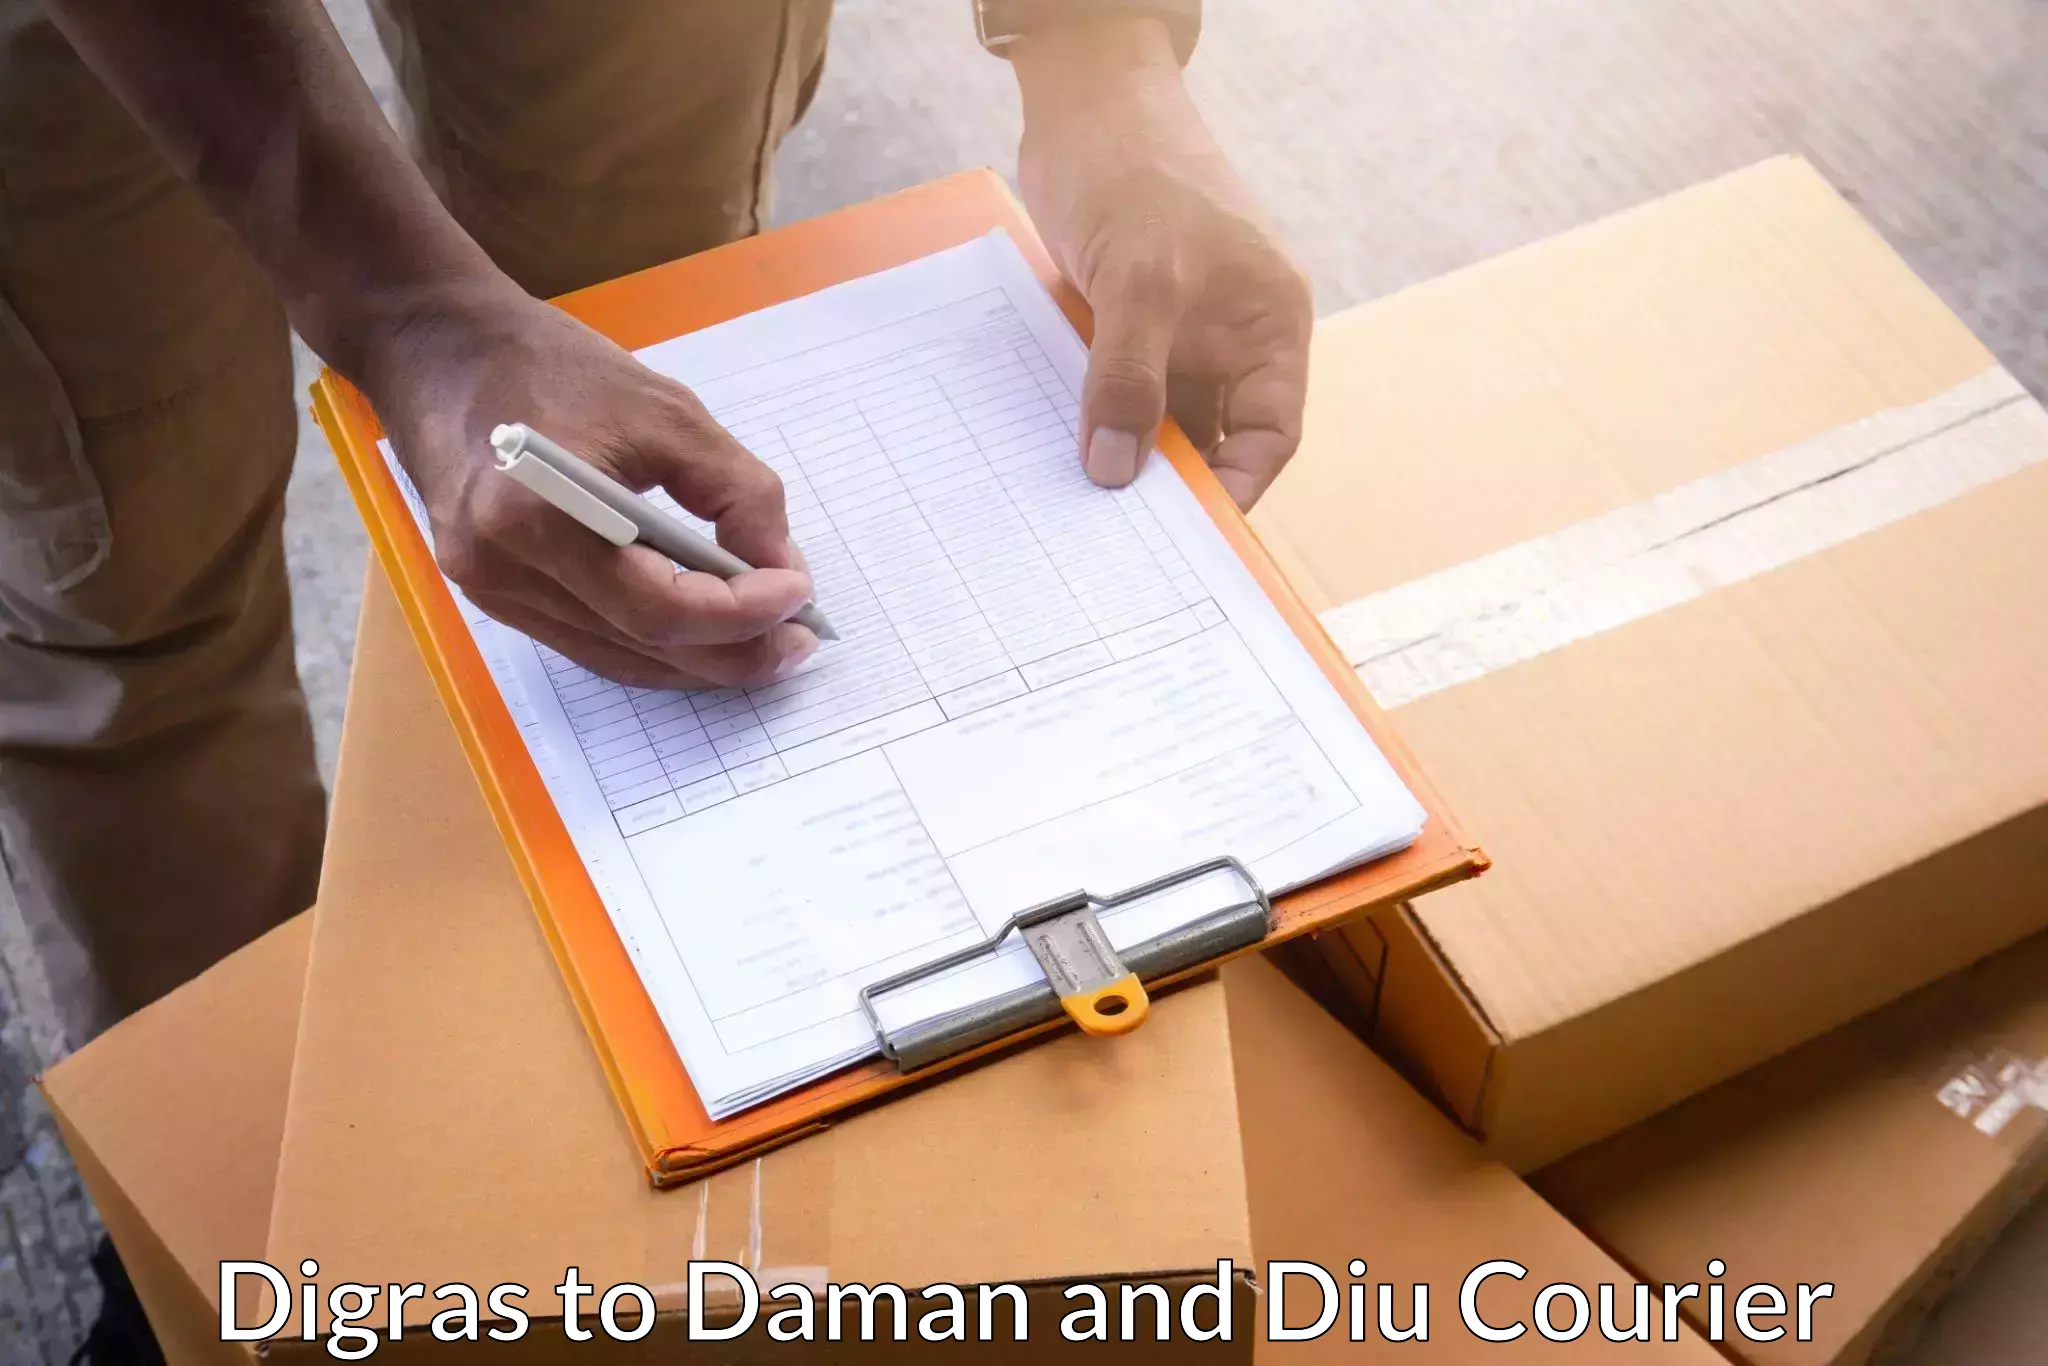 On-demand shipping options Digras to Daman and Diu